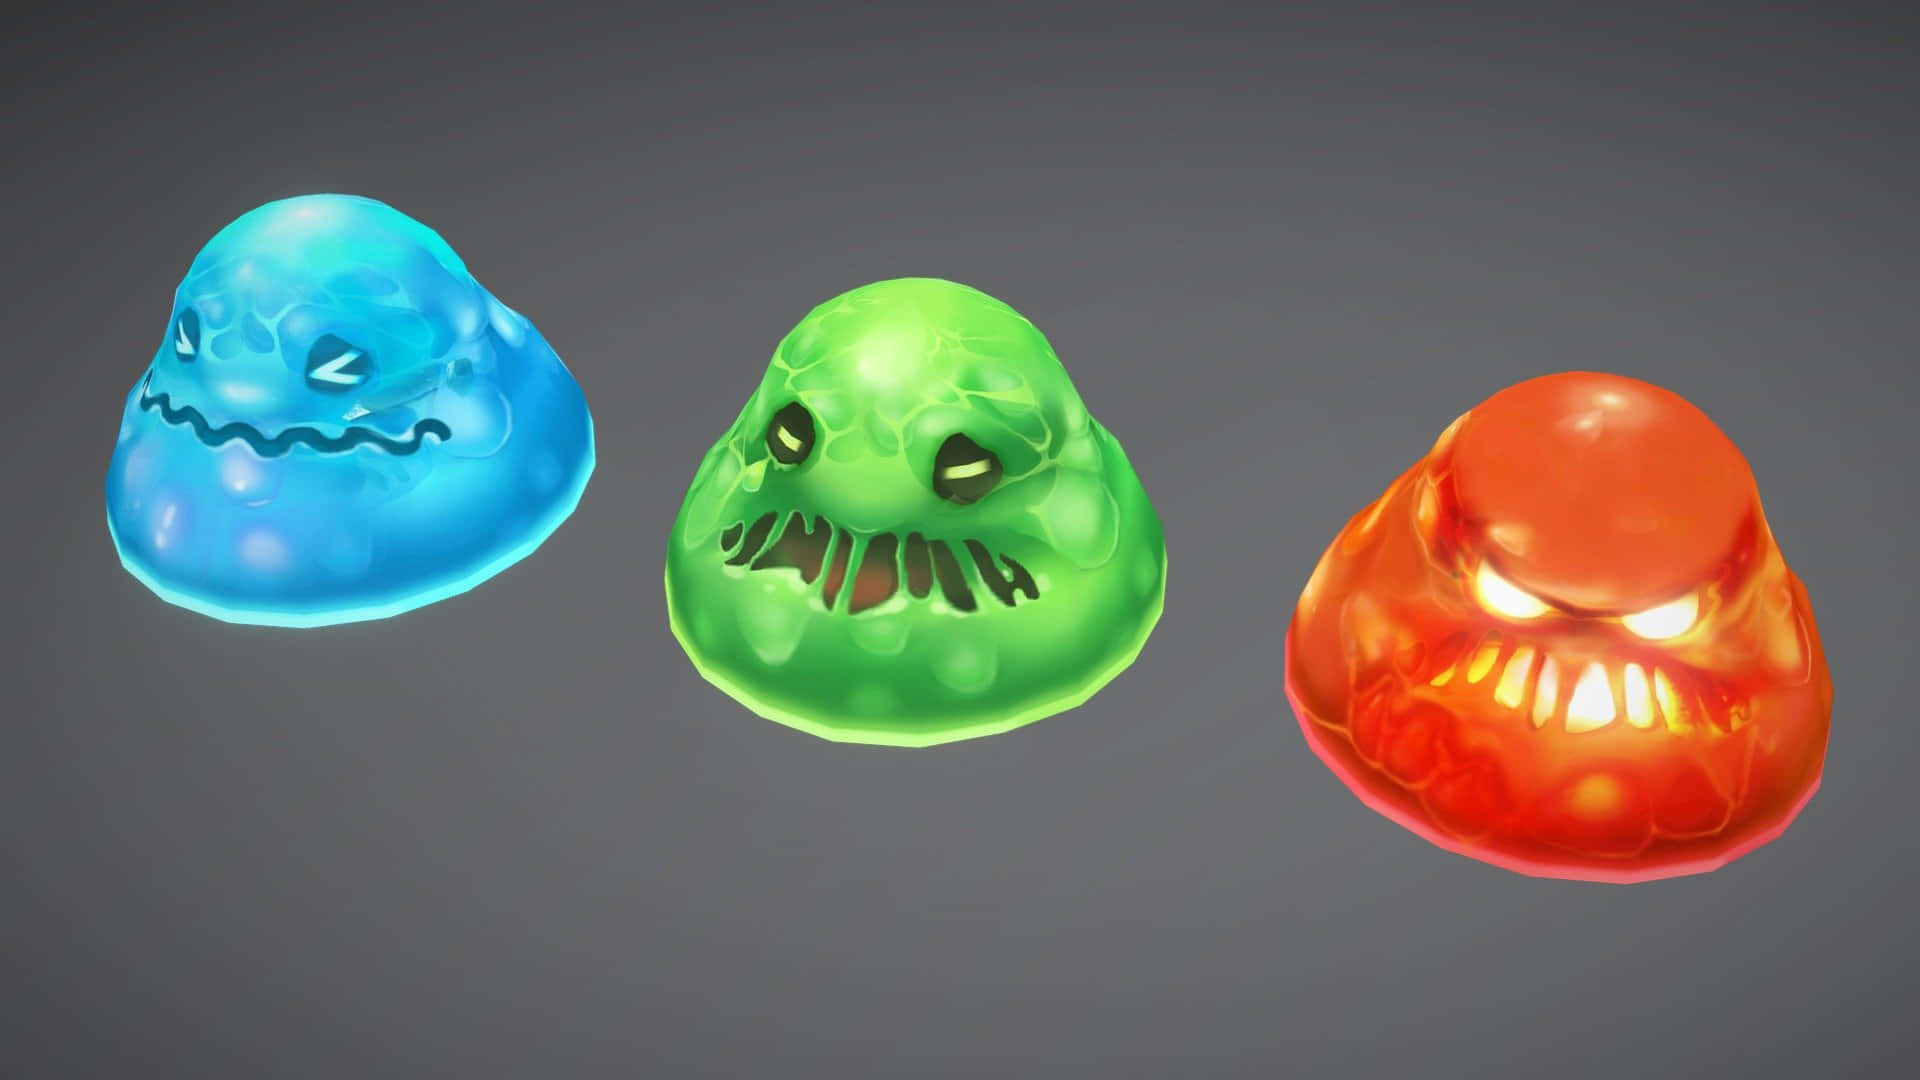 Cast a spooky spell with Halloween Slime! Wallpaper